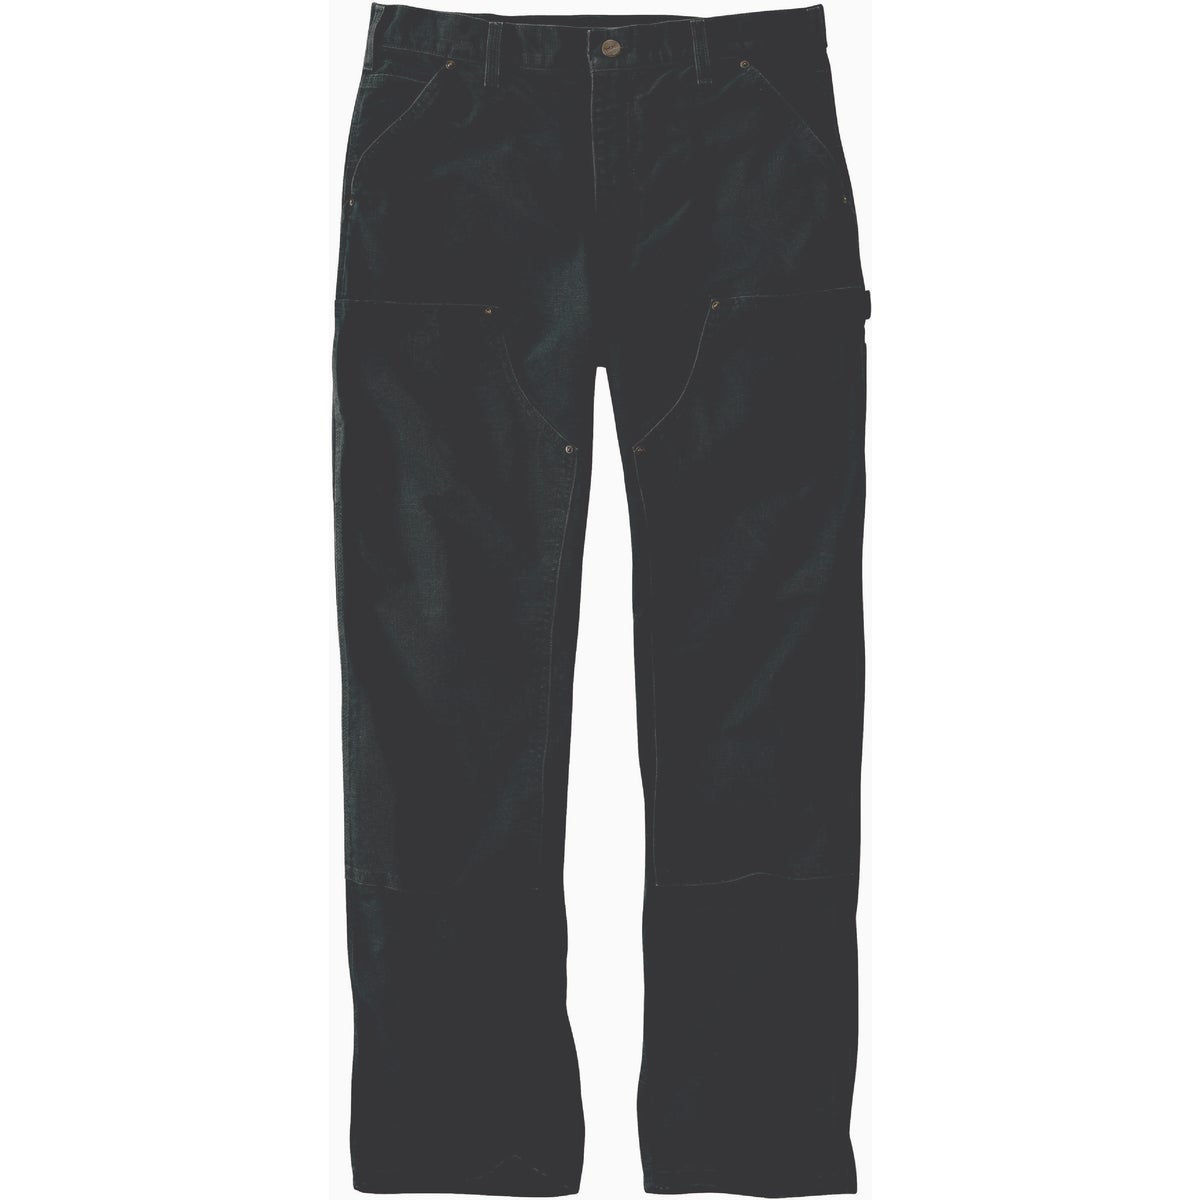 Carhartt Men's Washed Duck Double-Front Utility Work Pant